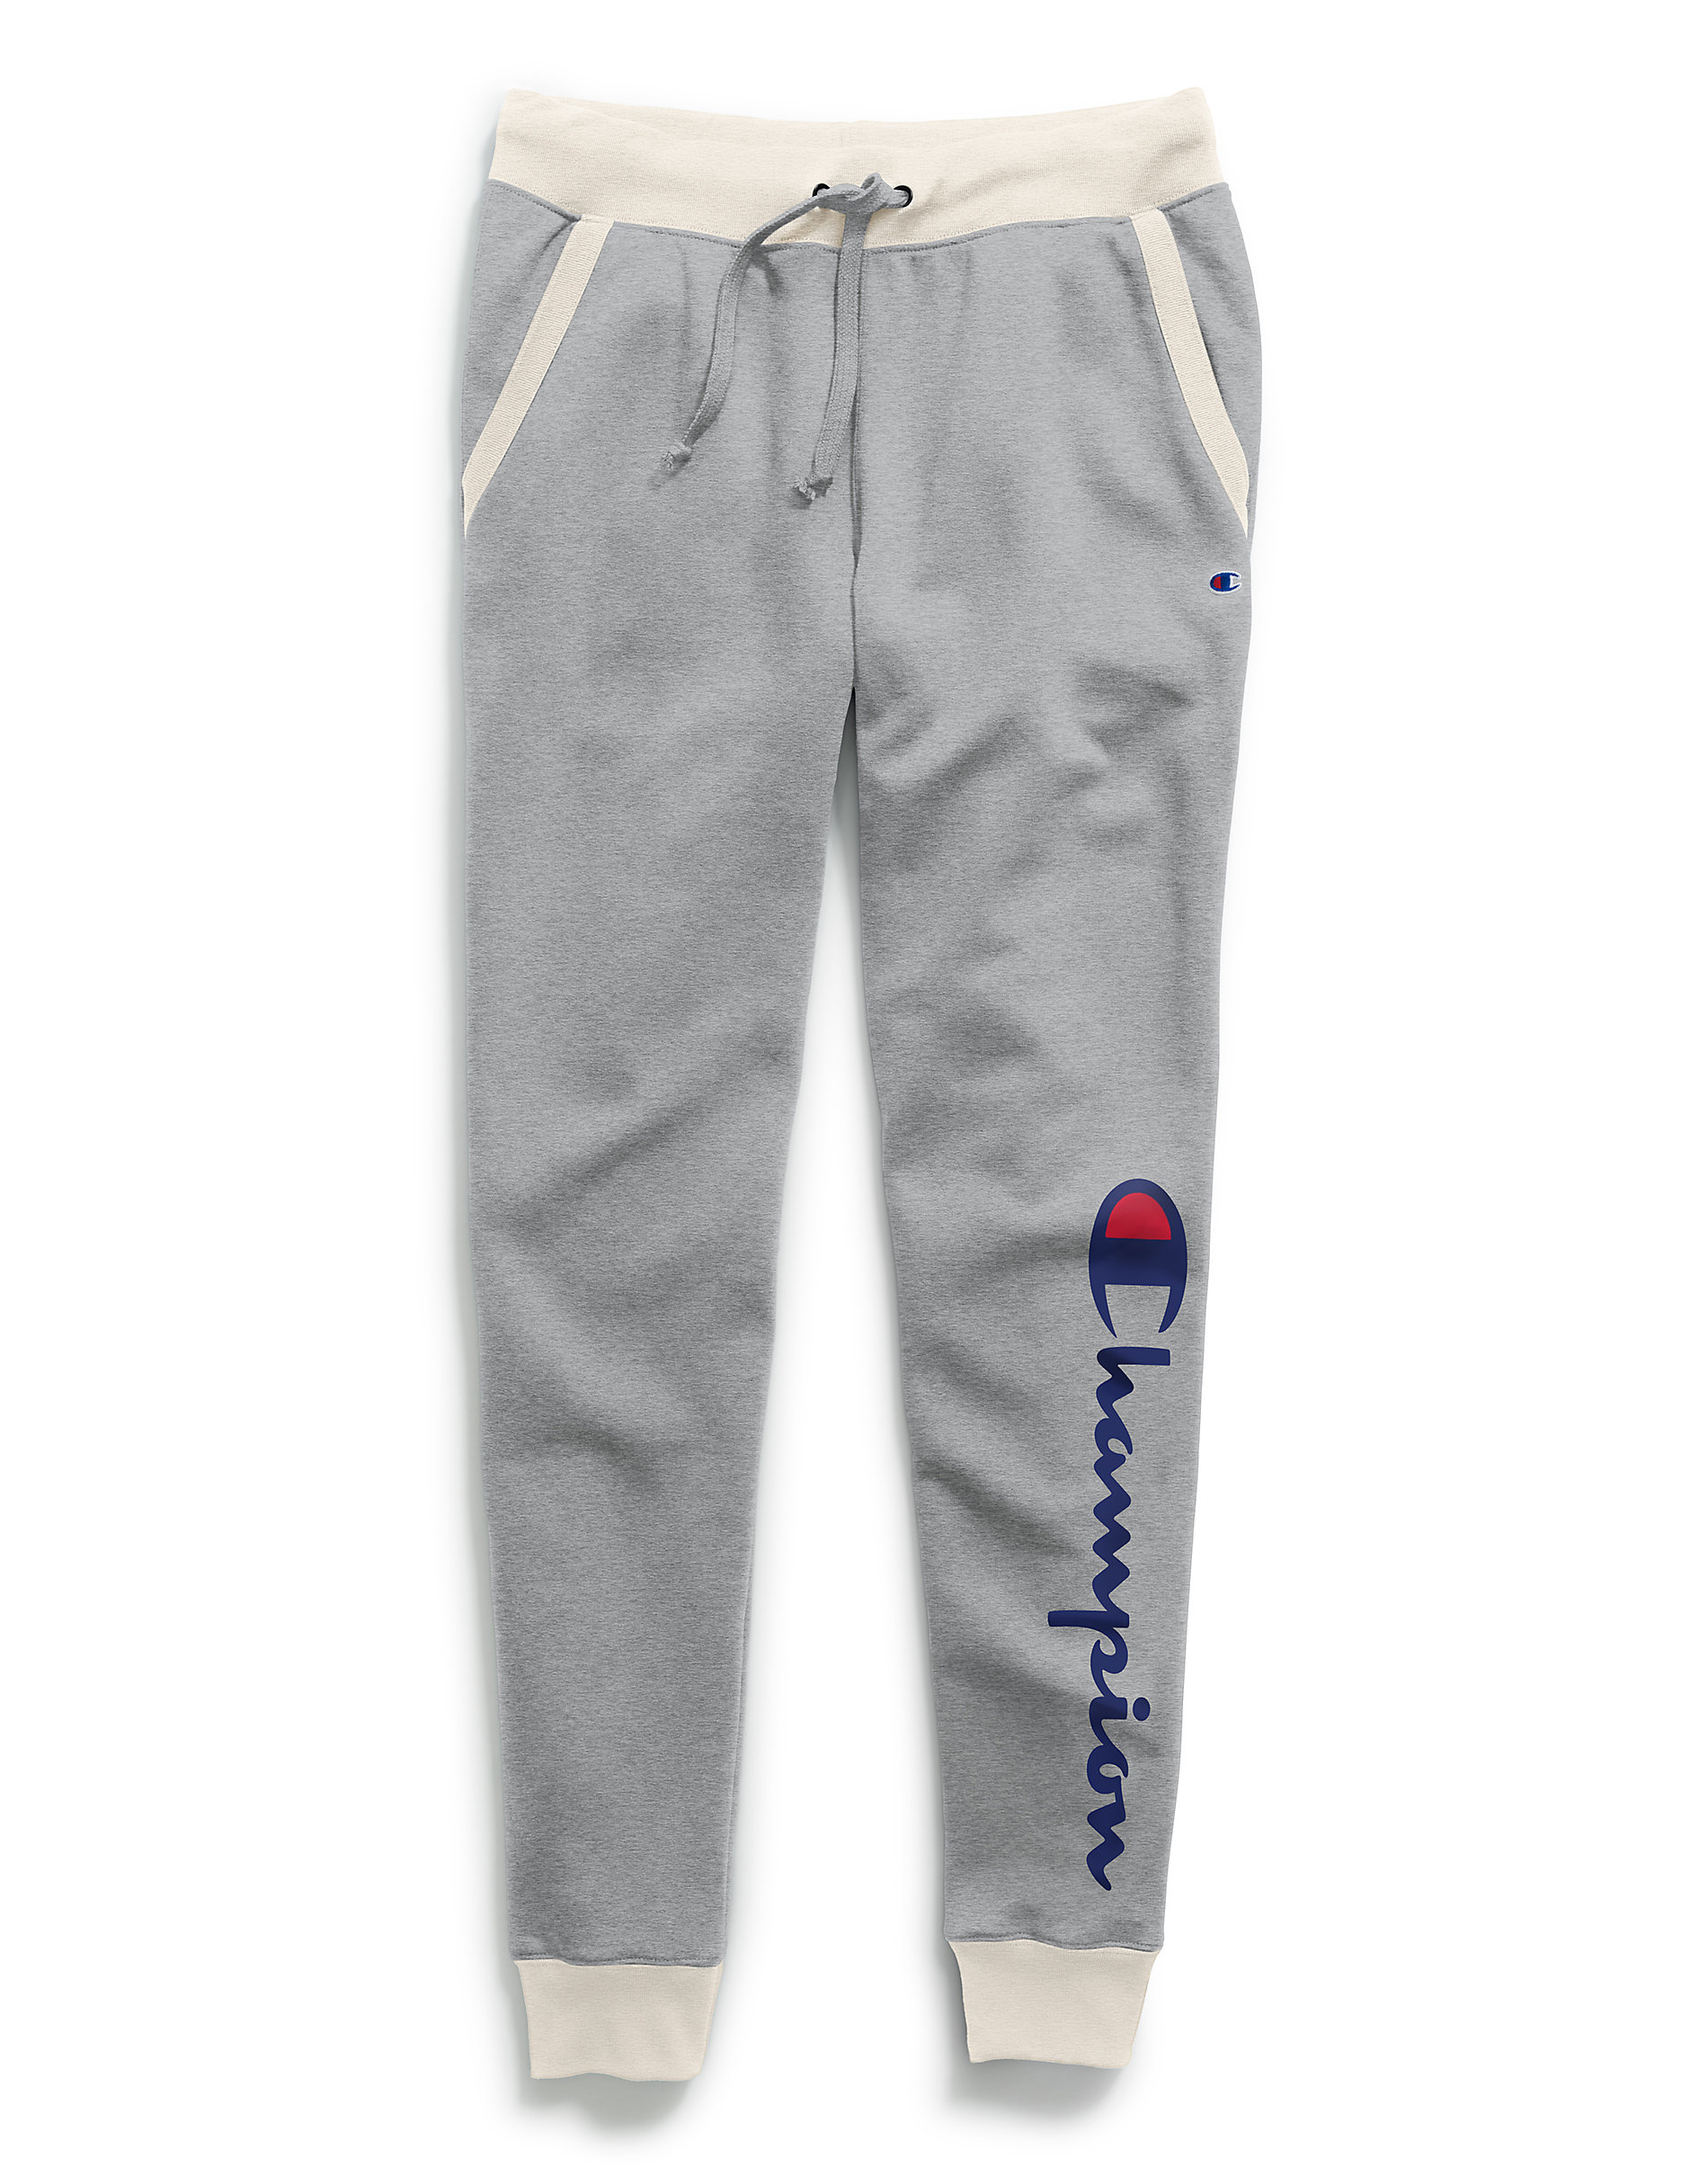 Champion Joggers Sweatpants Womens Powerblend Fleece Tapered Pockets 30in inseam 